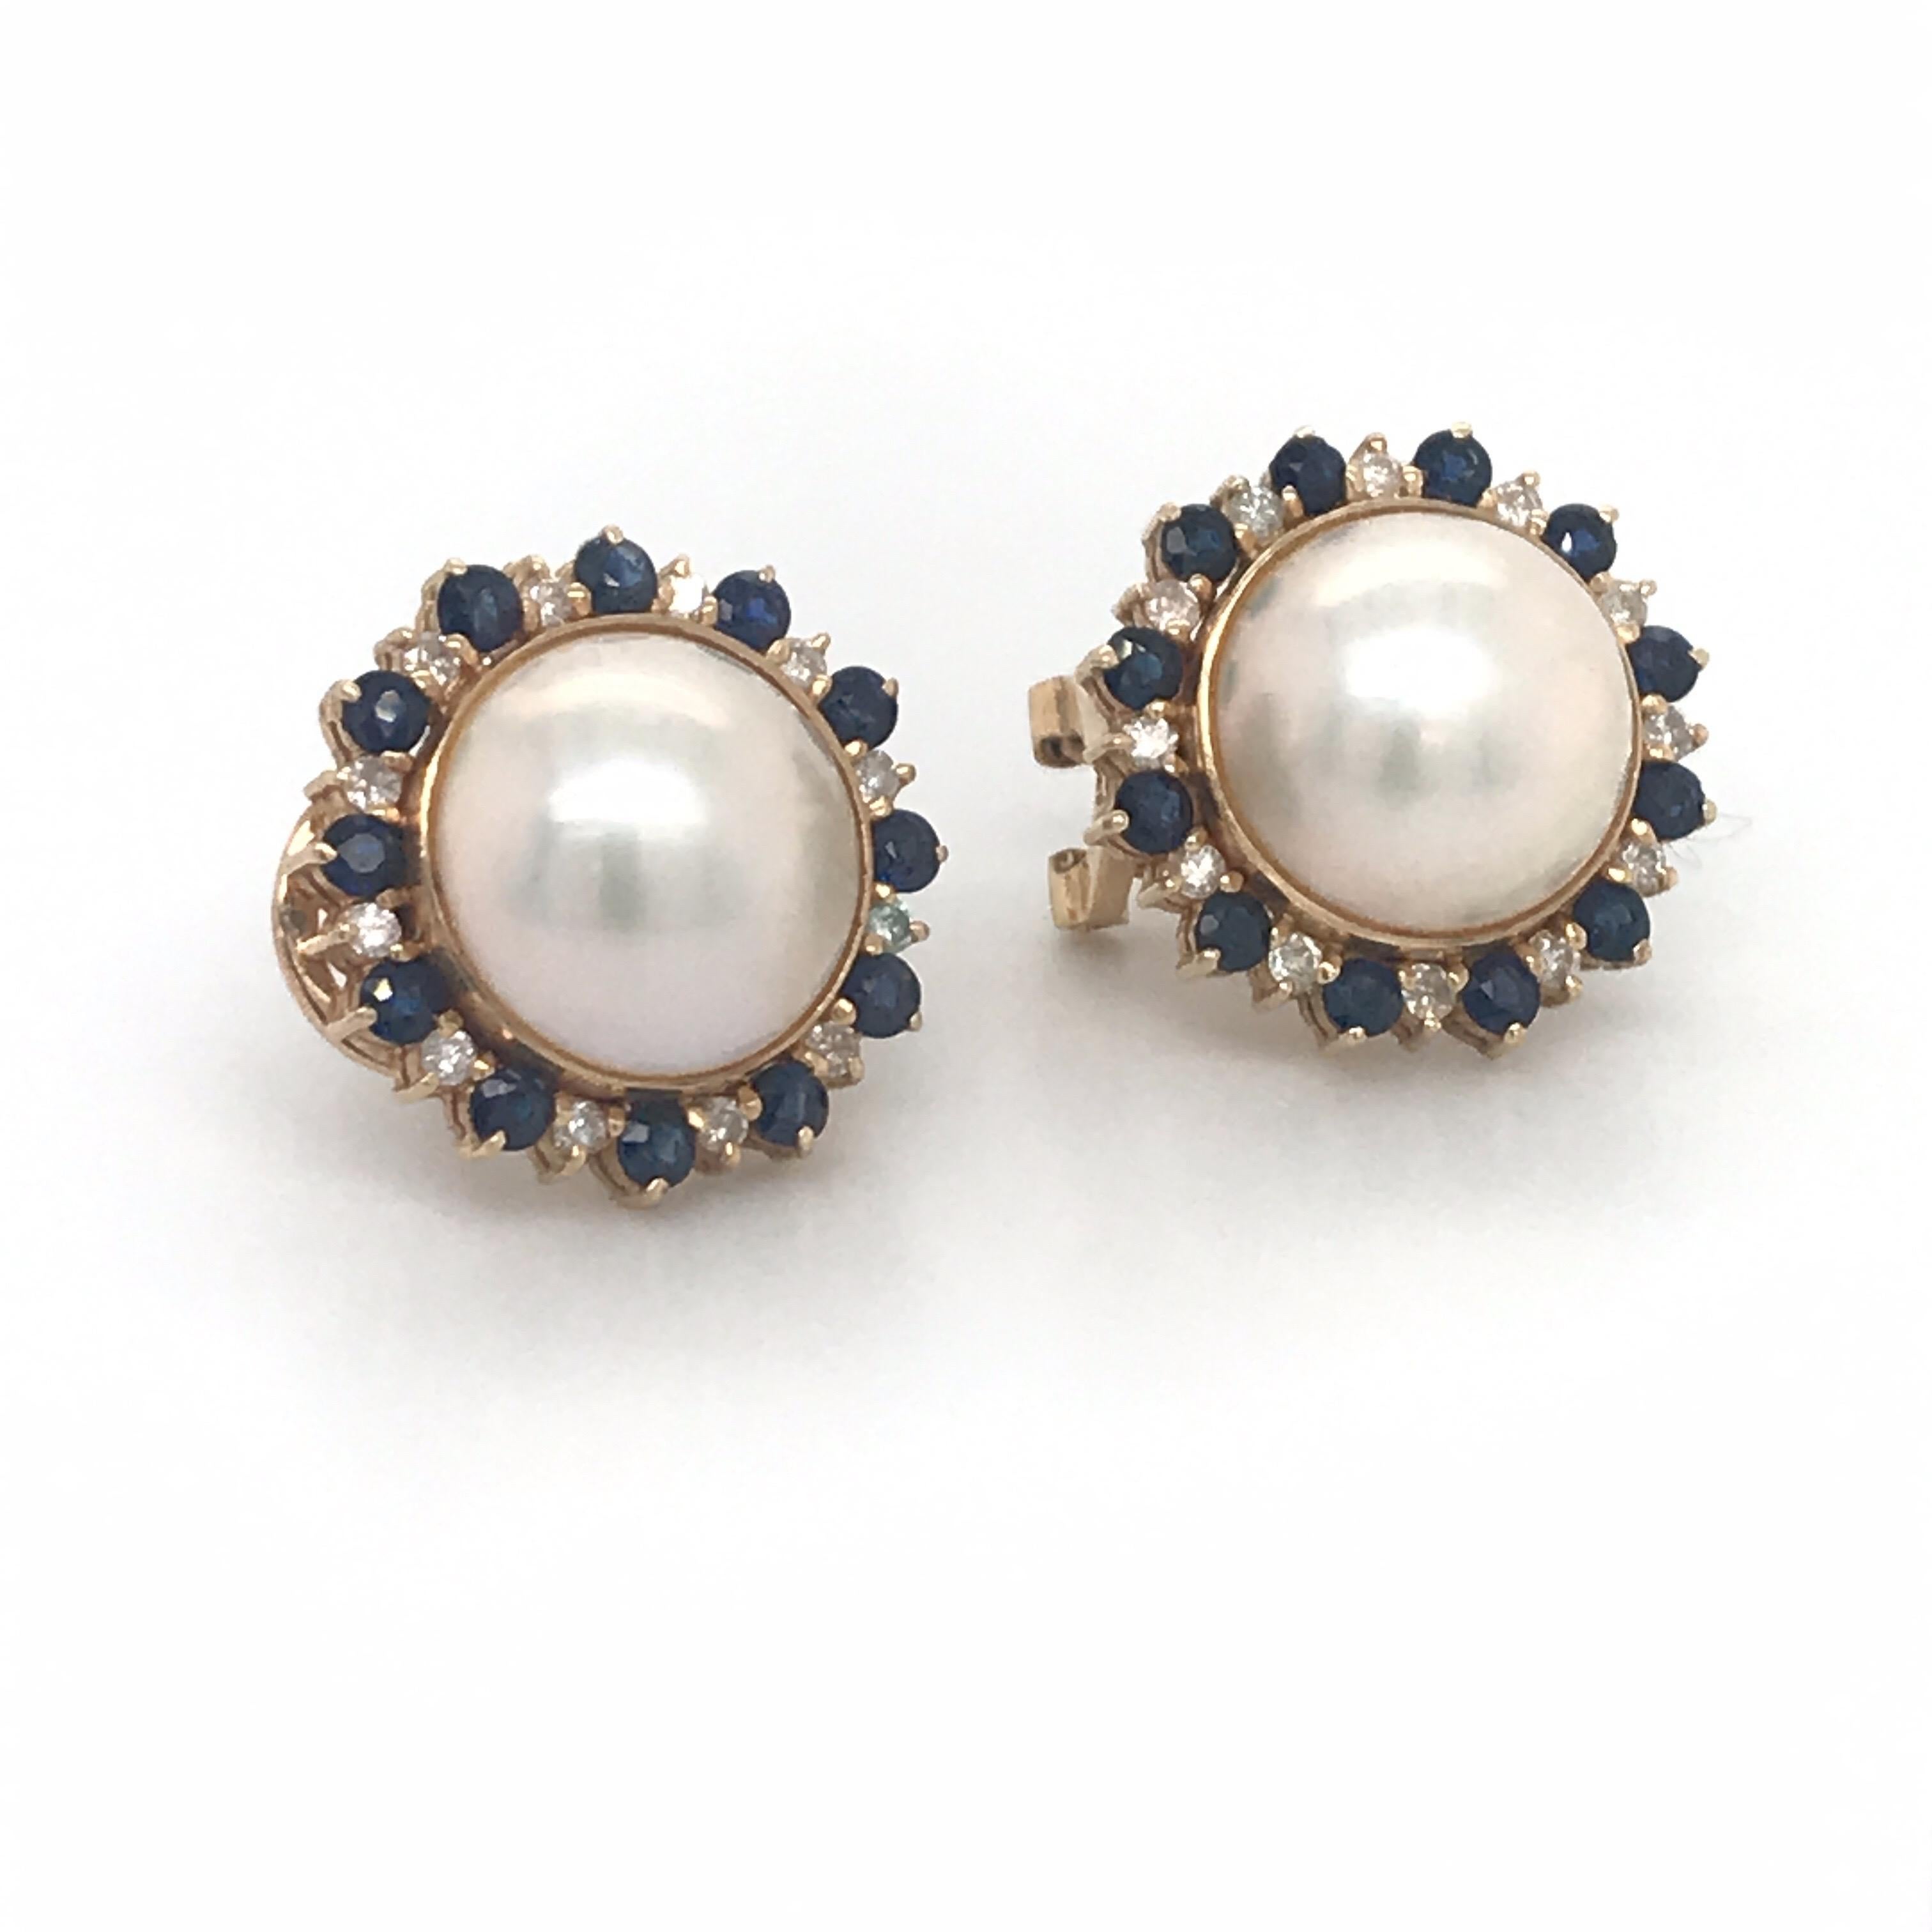 14K Yellow gold stud earrings featuring two Mob pearls measuring 11-12 mm flanked with alternating sapphire and diamonds. 
Color G-H
Clarity SI